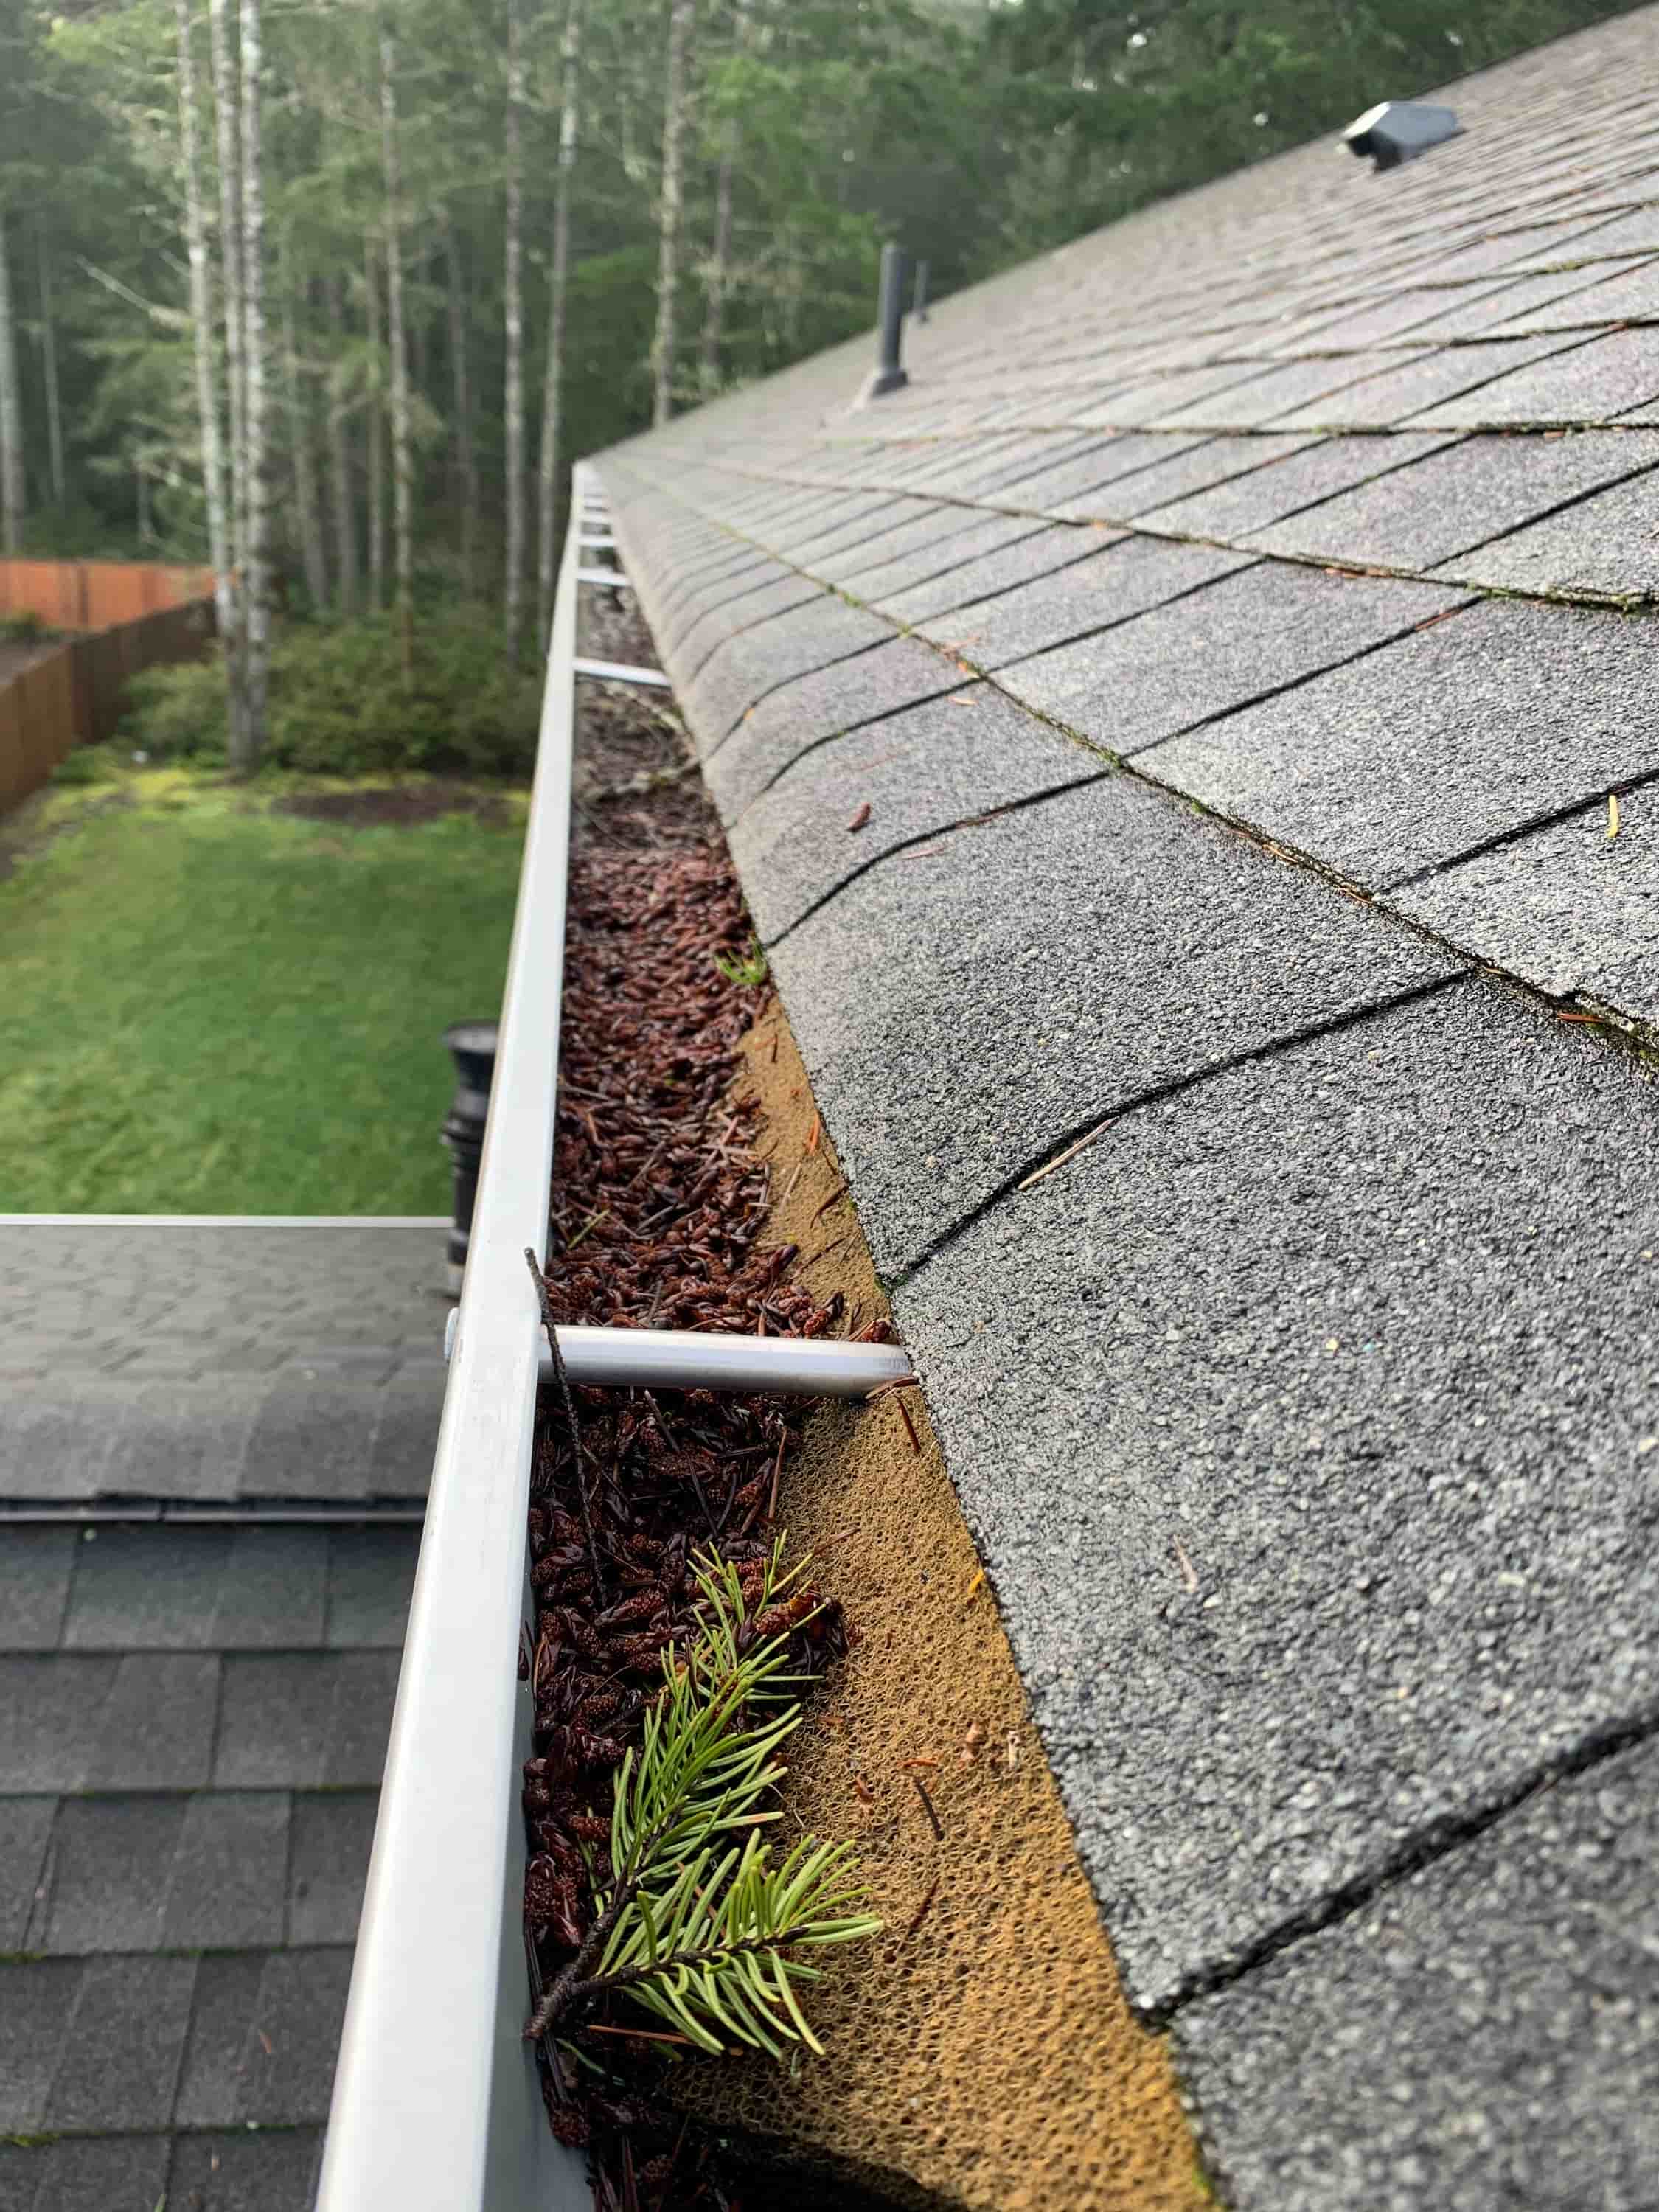 average price to clean gutters